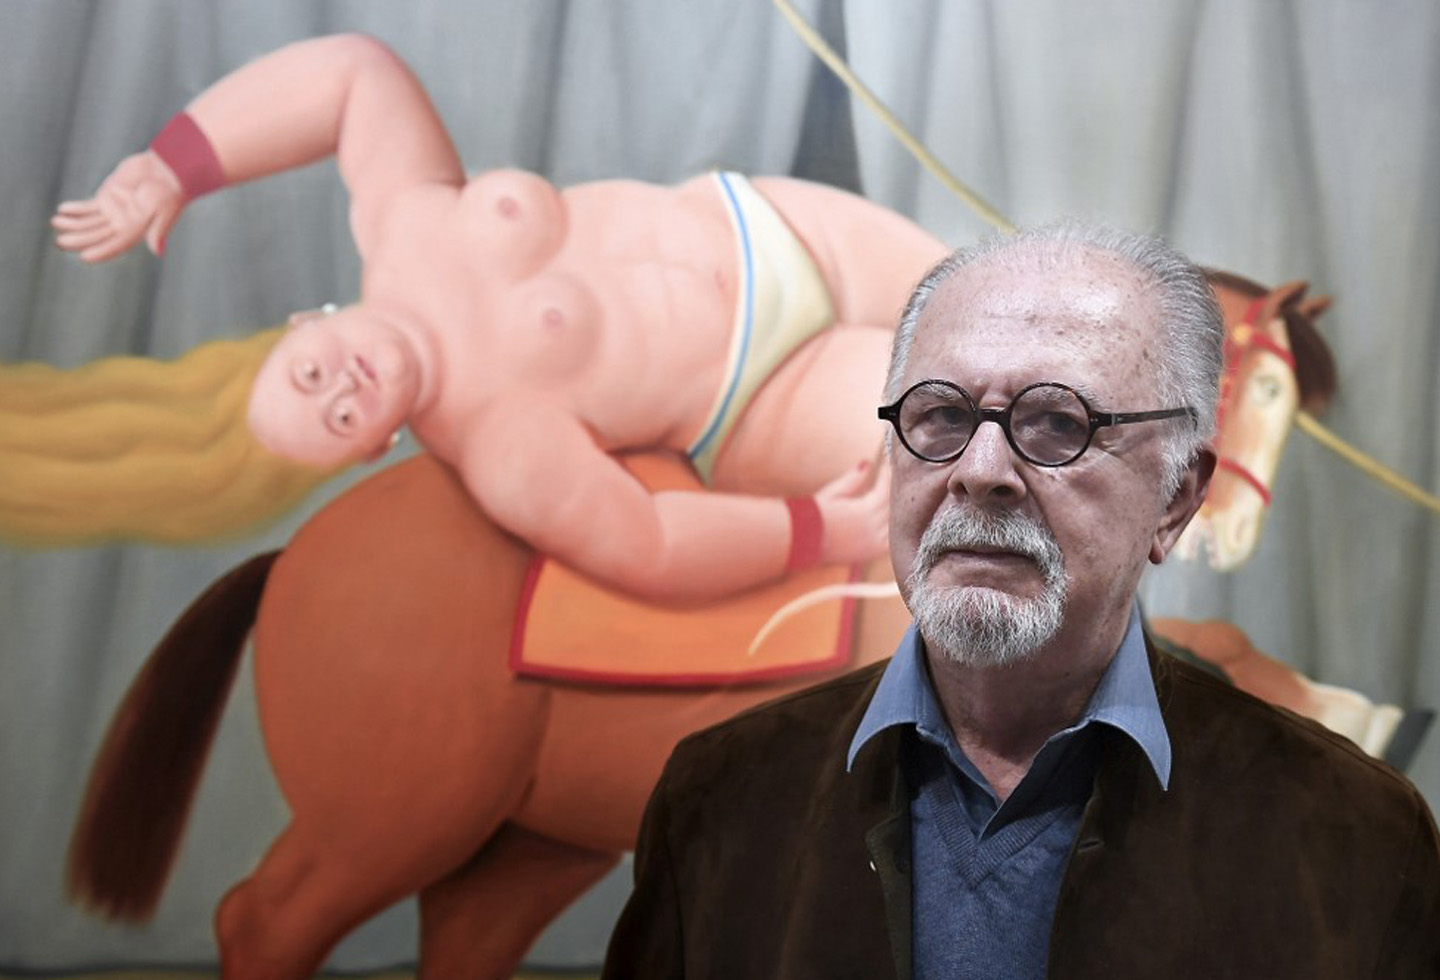 Botero celebrates his 90 years painting watercolors and with family